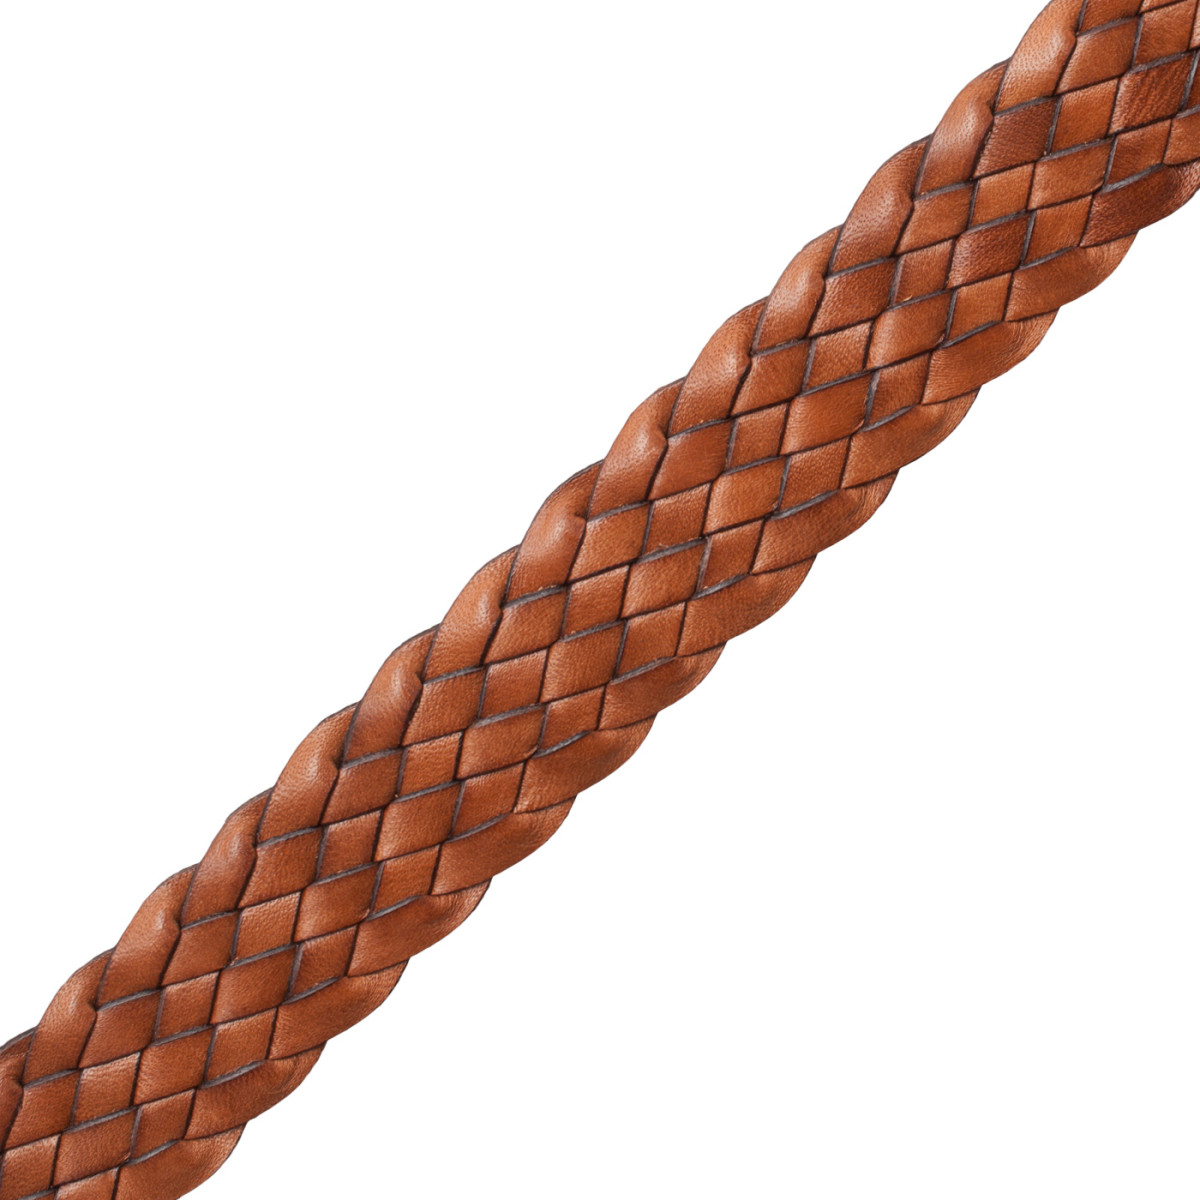 This gorgeous braided leather strap was a special collab I worked